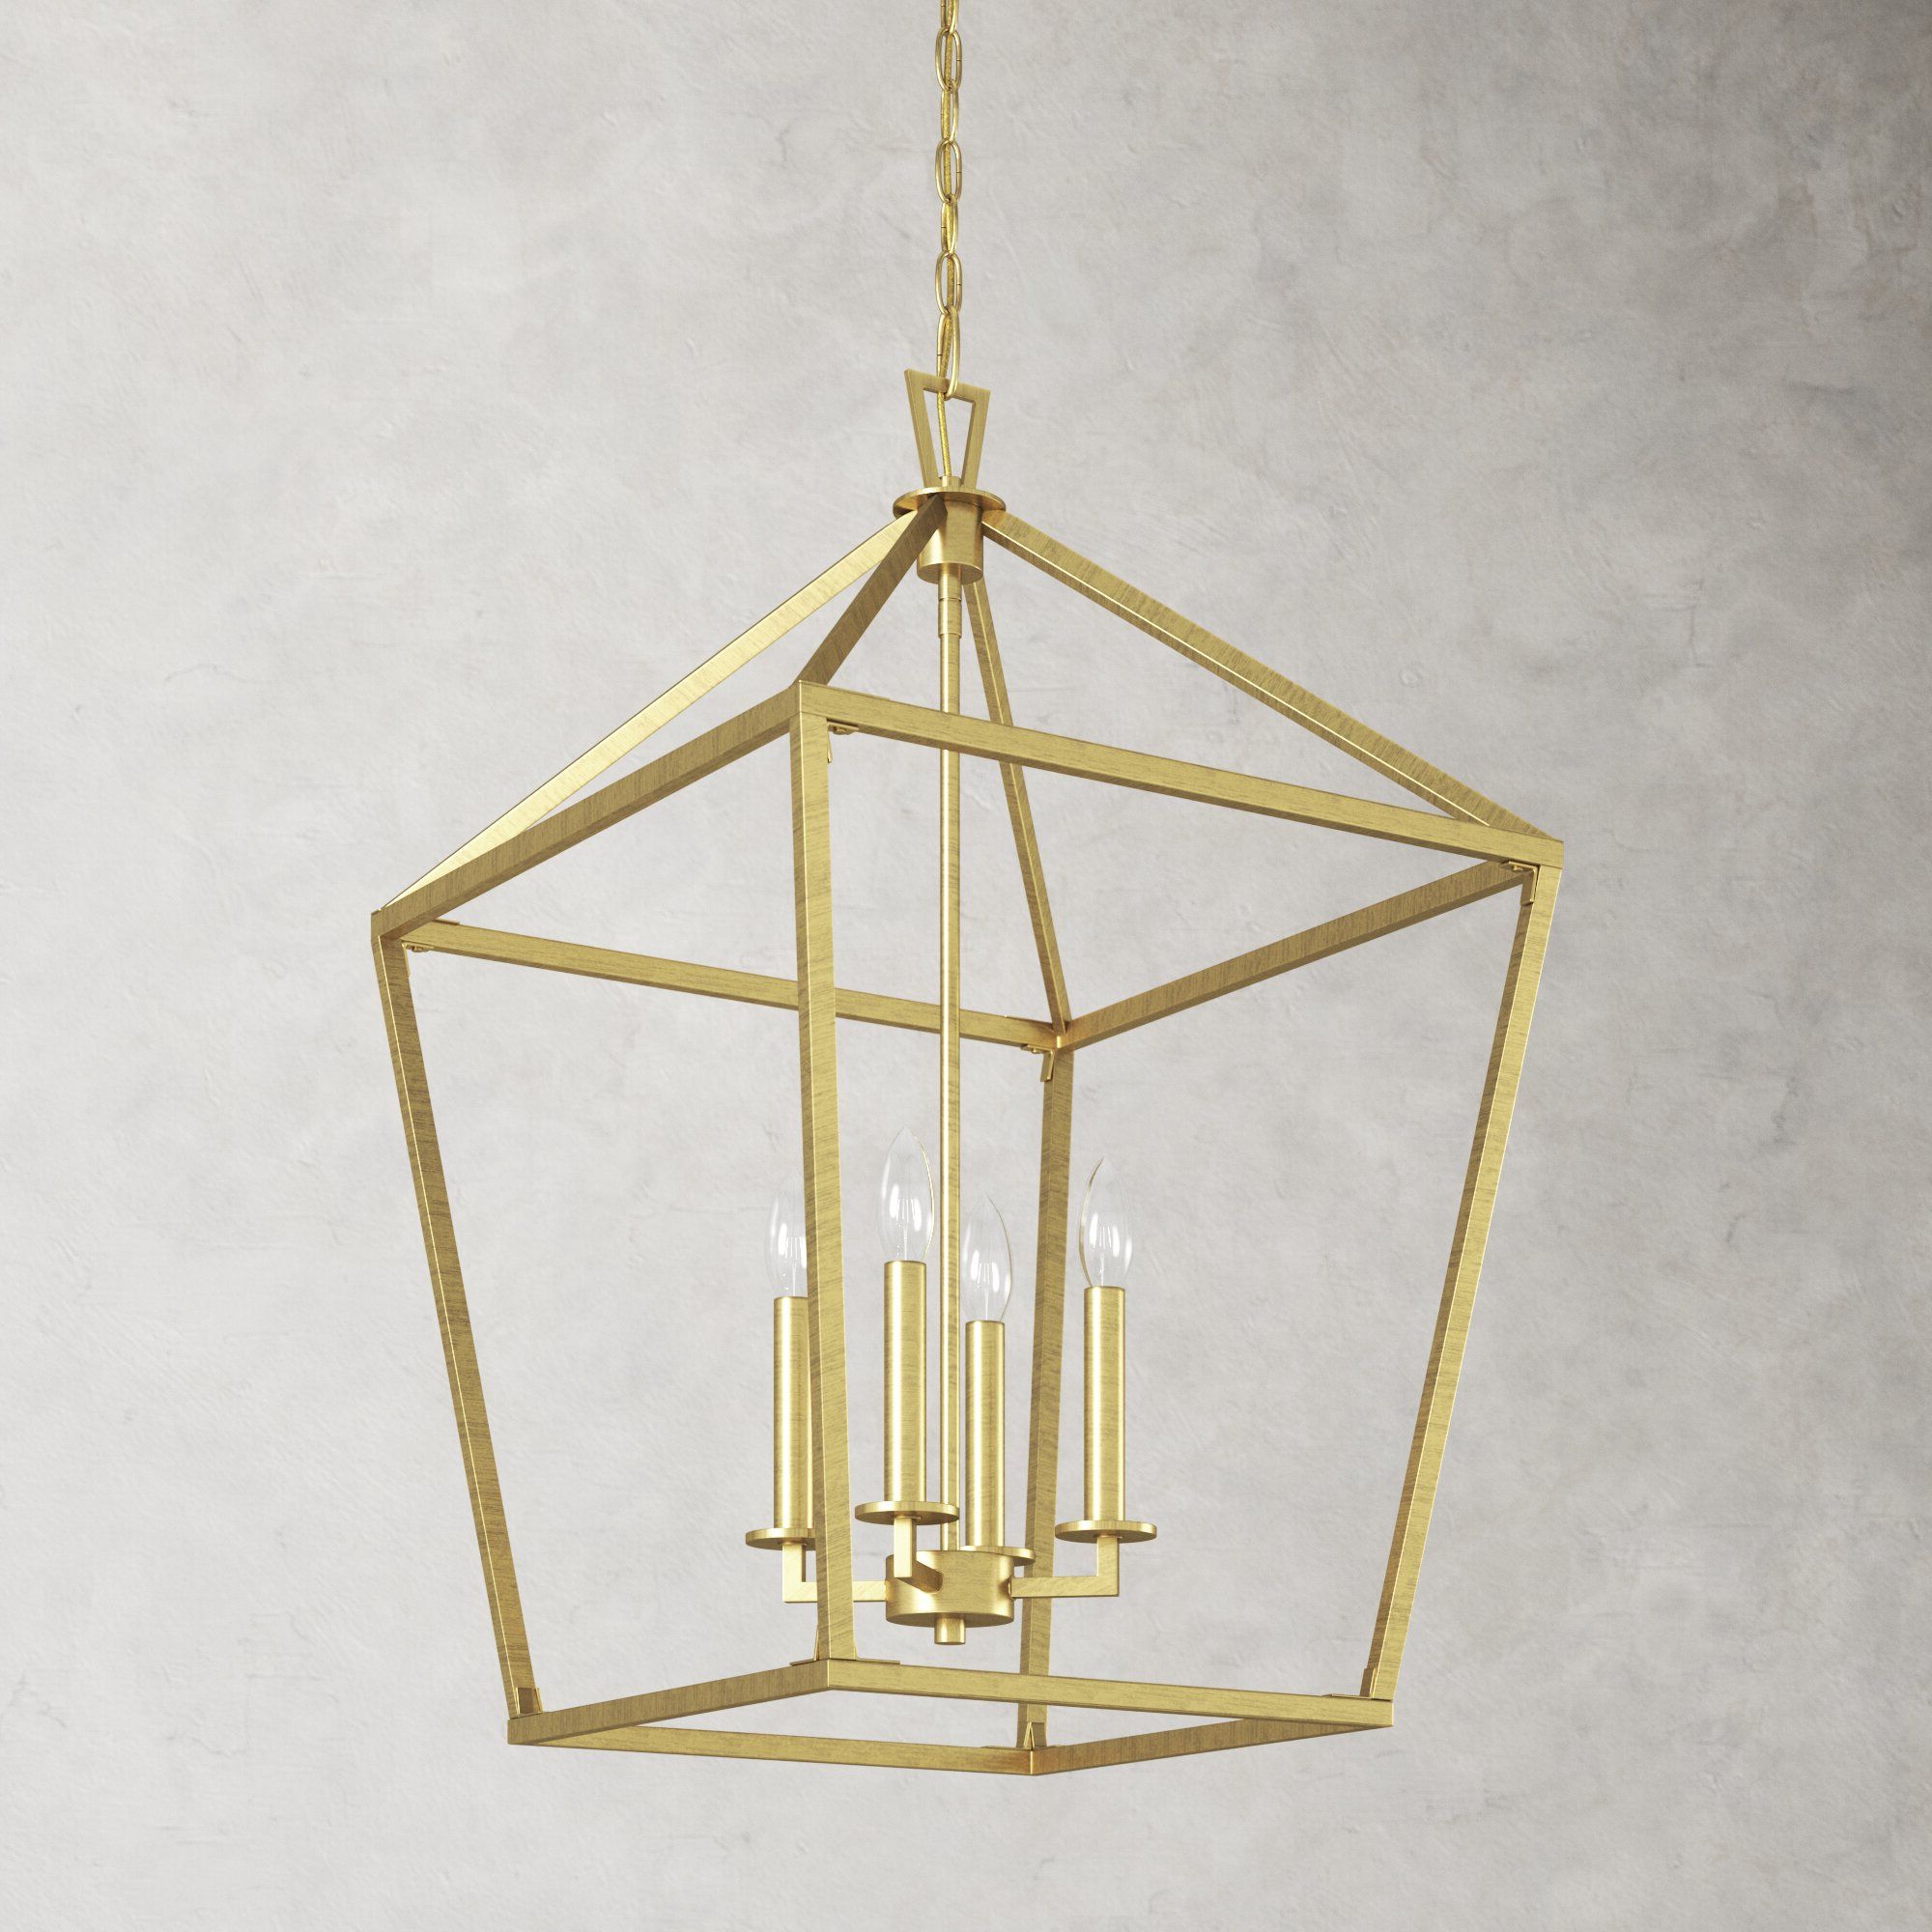 Brass Finish Lantern Chandeliers You'll Love In  (View 2 of 15)